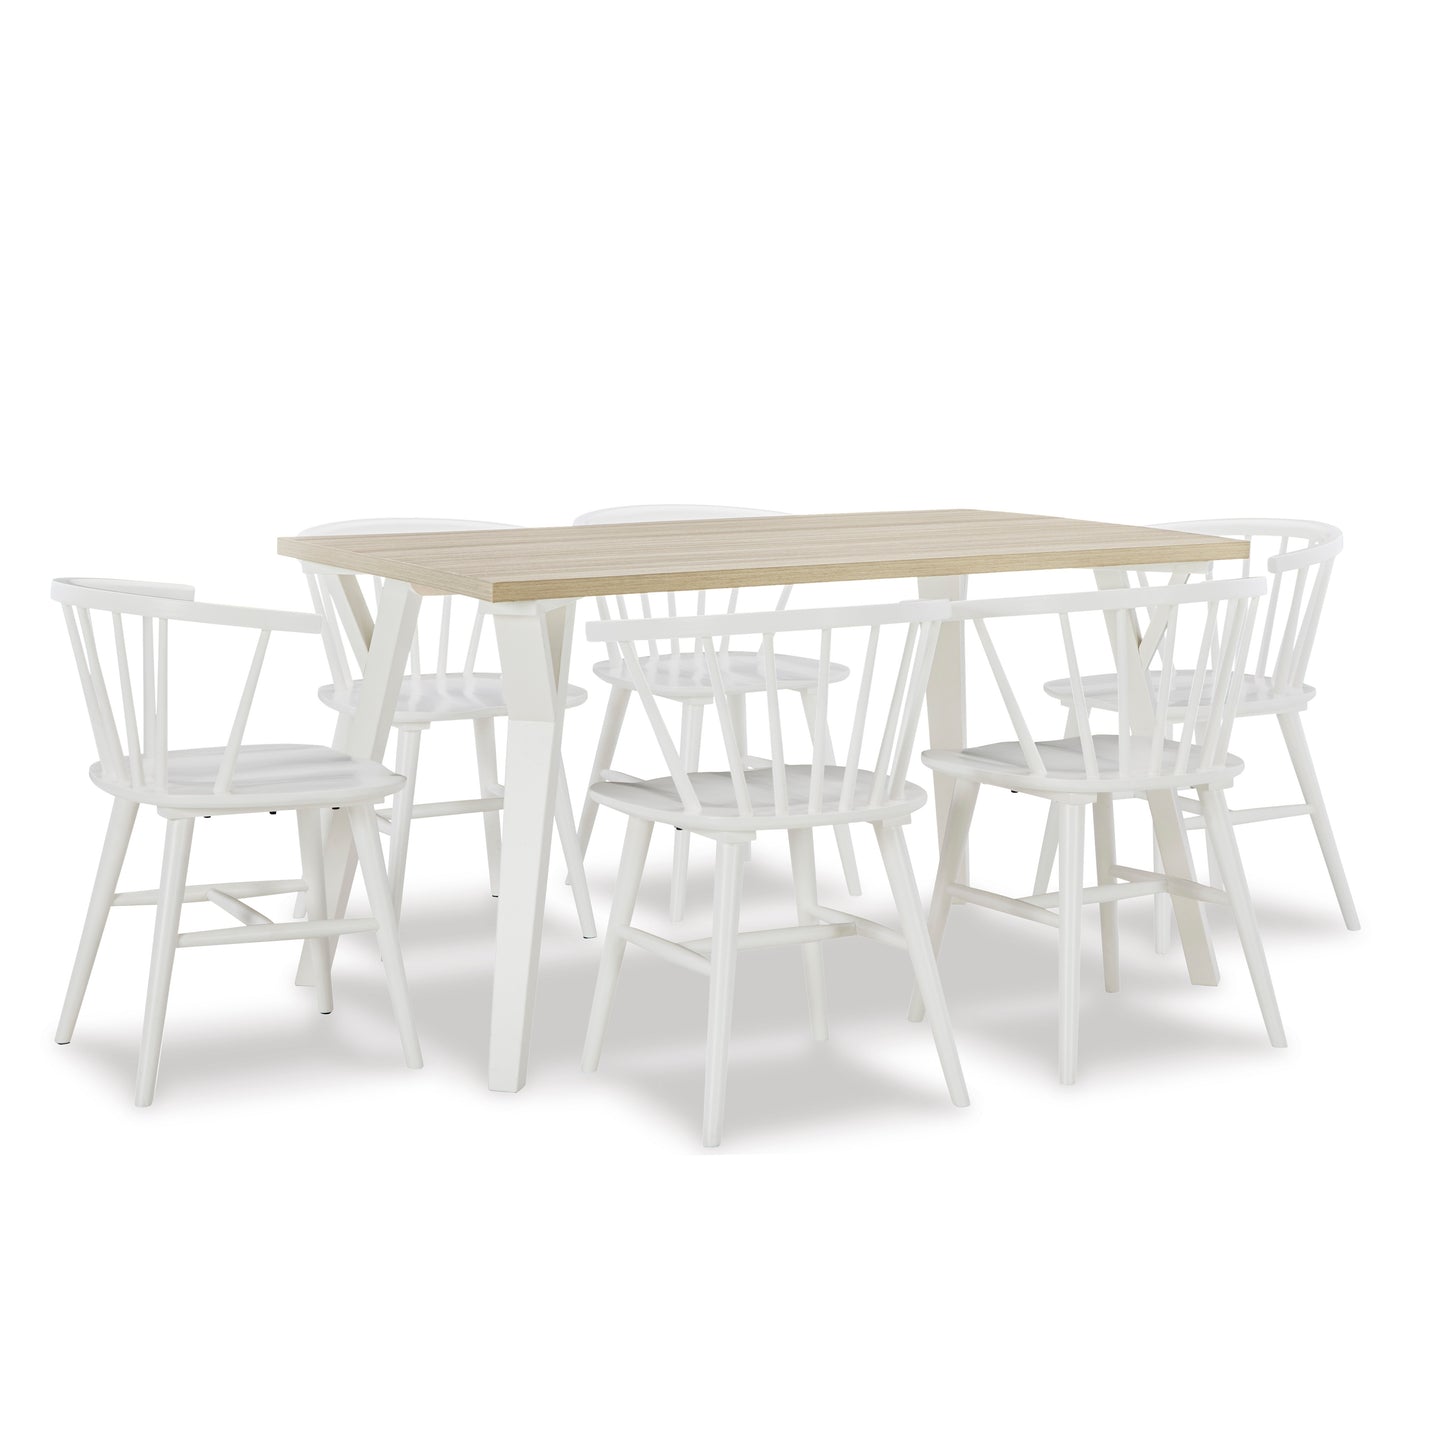 Alwynn White and Natural Wood 7-piece Dining Set, Dining Table with 6 Stylish Chairs